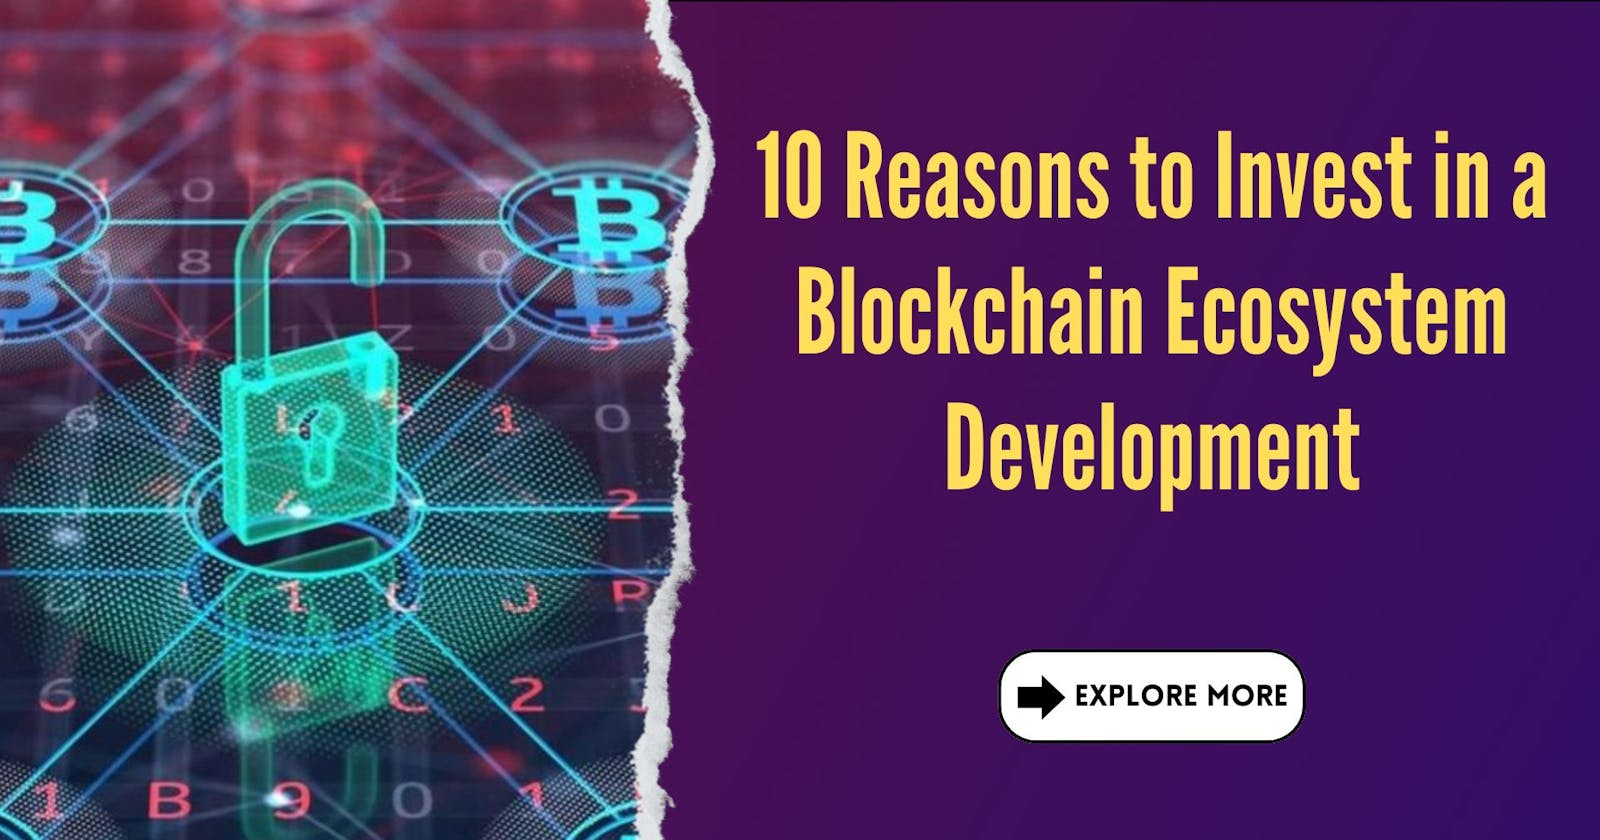 10 Reasons to Invest in a Blockchain Ecosystem Development